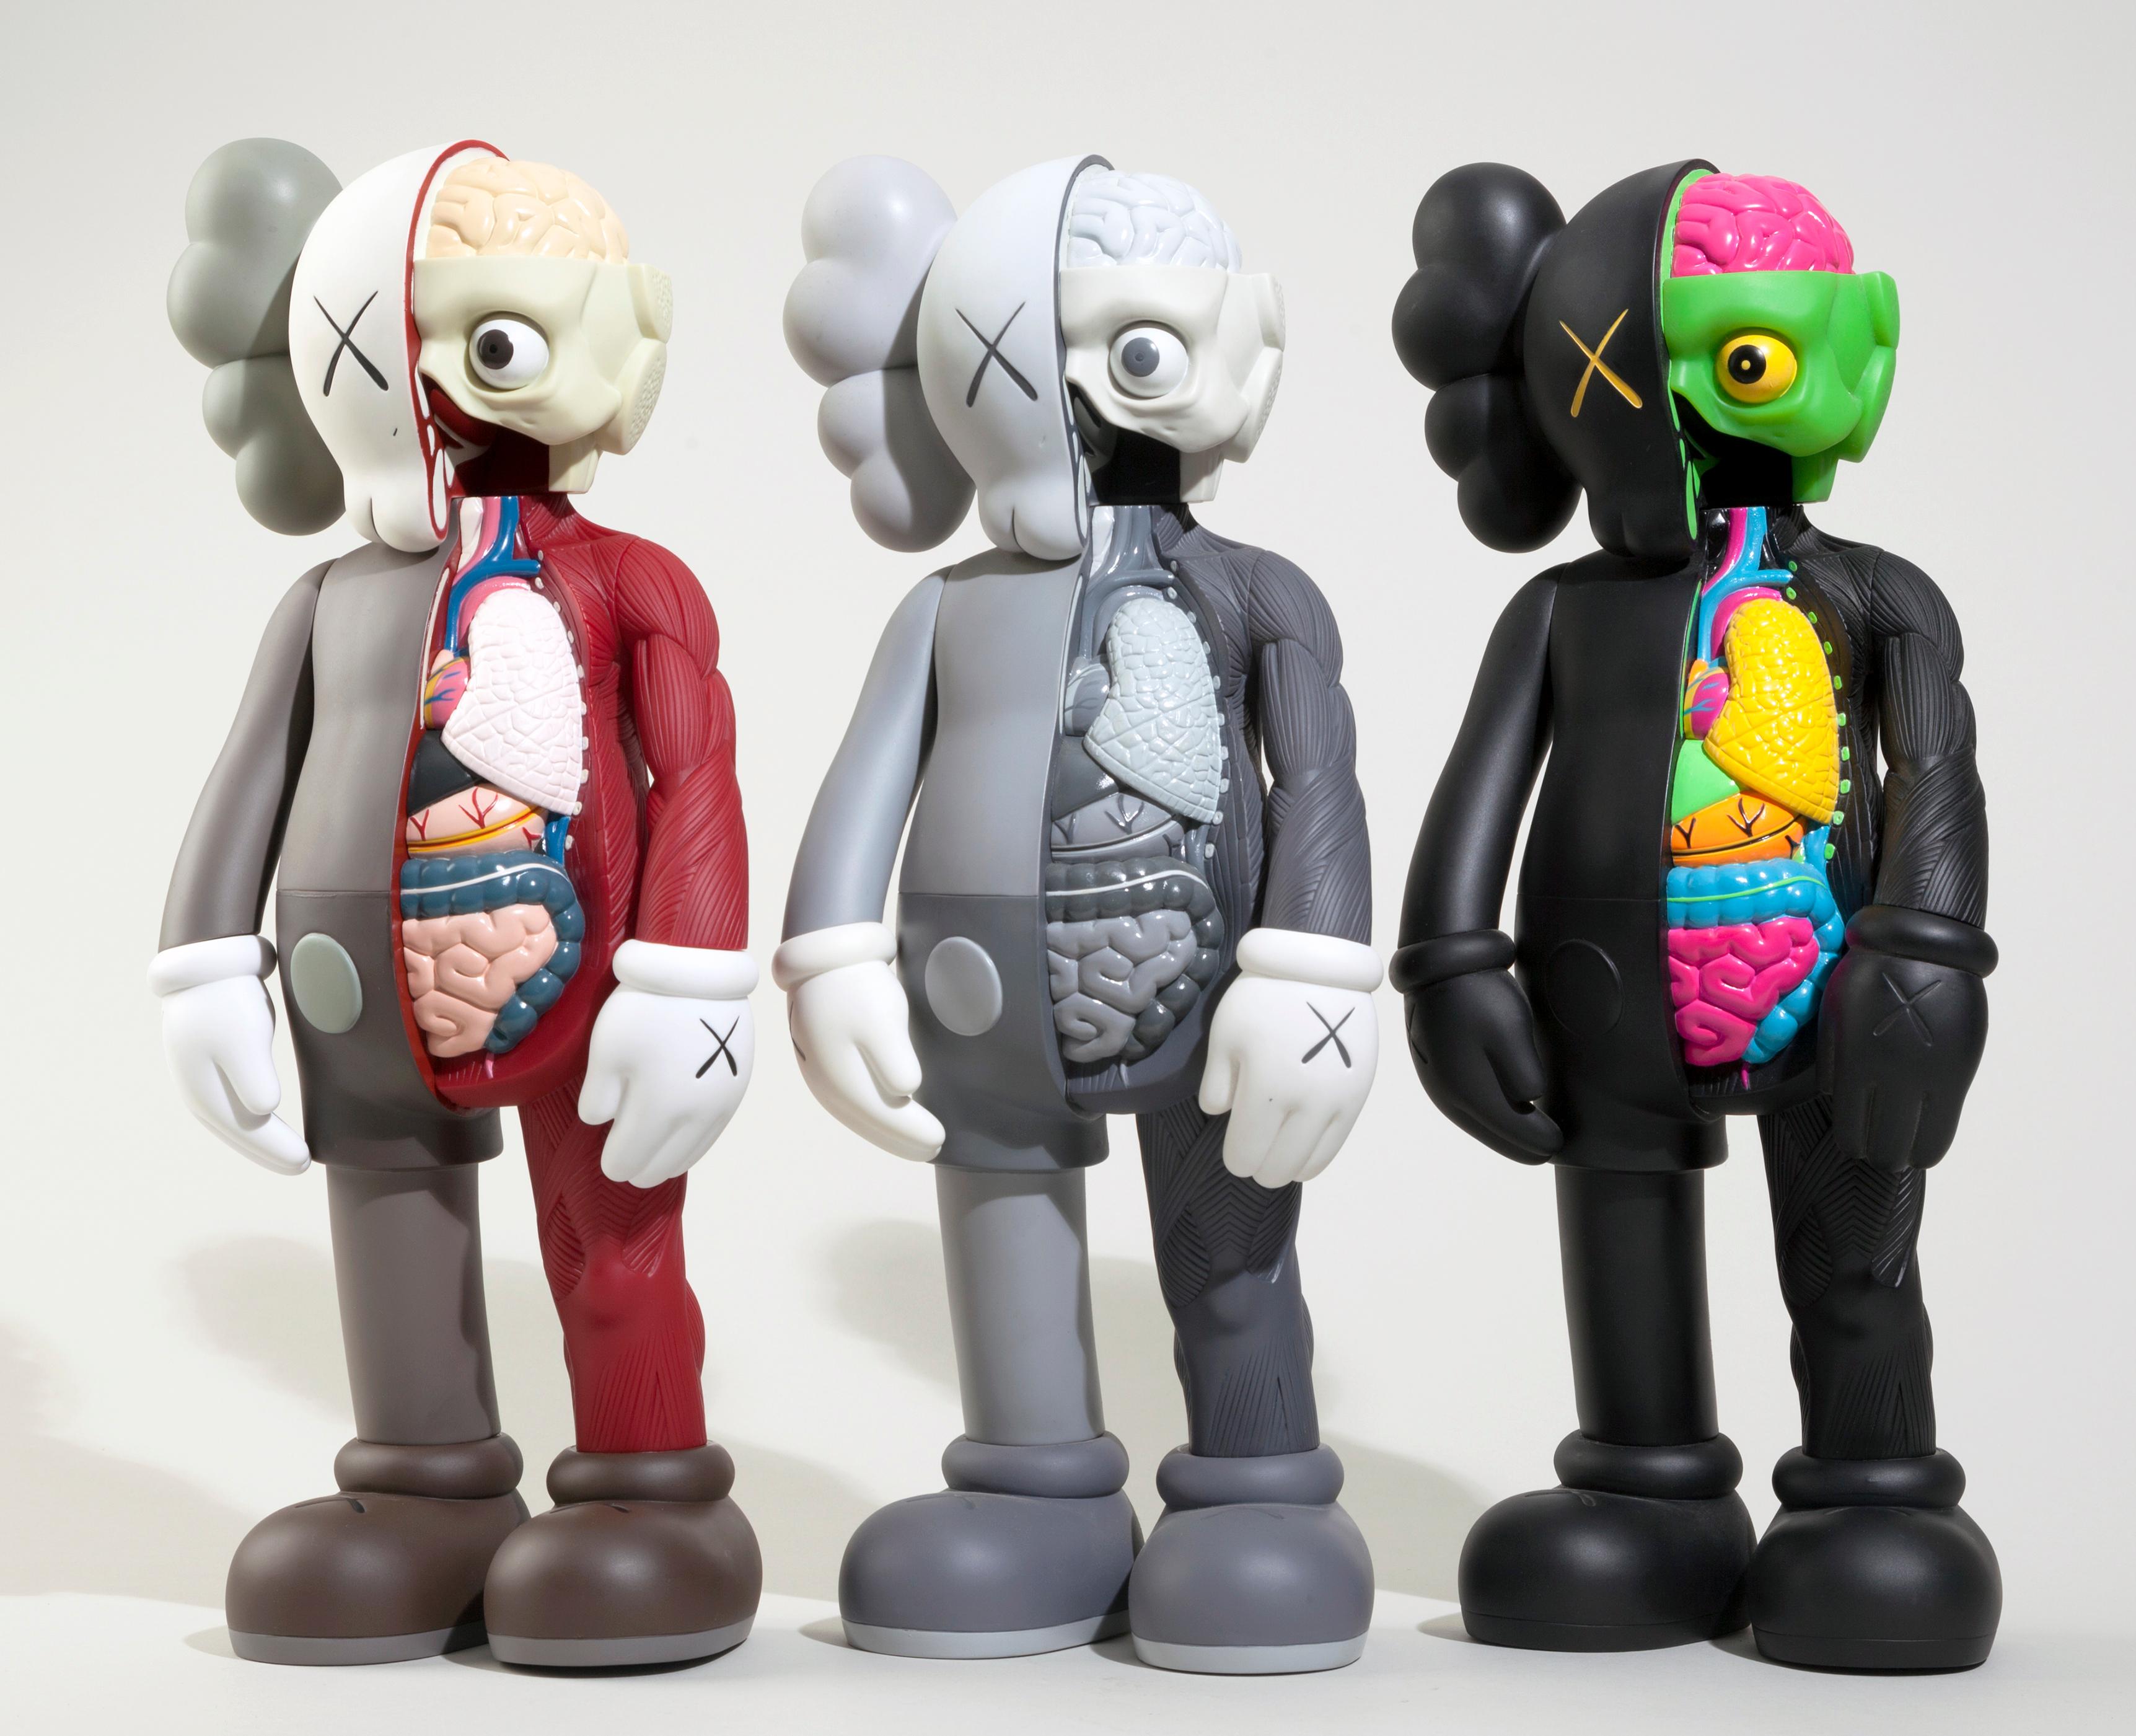 KAWS Companion: Set of 3 Flayed Companions. Each, new and sealed in its original packaging. Published by Medicom Japan in conjunction with the exhibition, KAWS: Where The End Starts at the Modern Art Museum of Fort Worth in 2016. These figurines